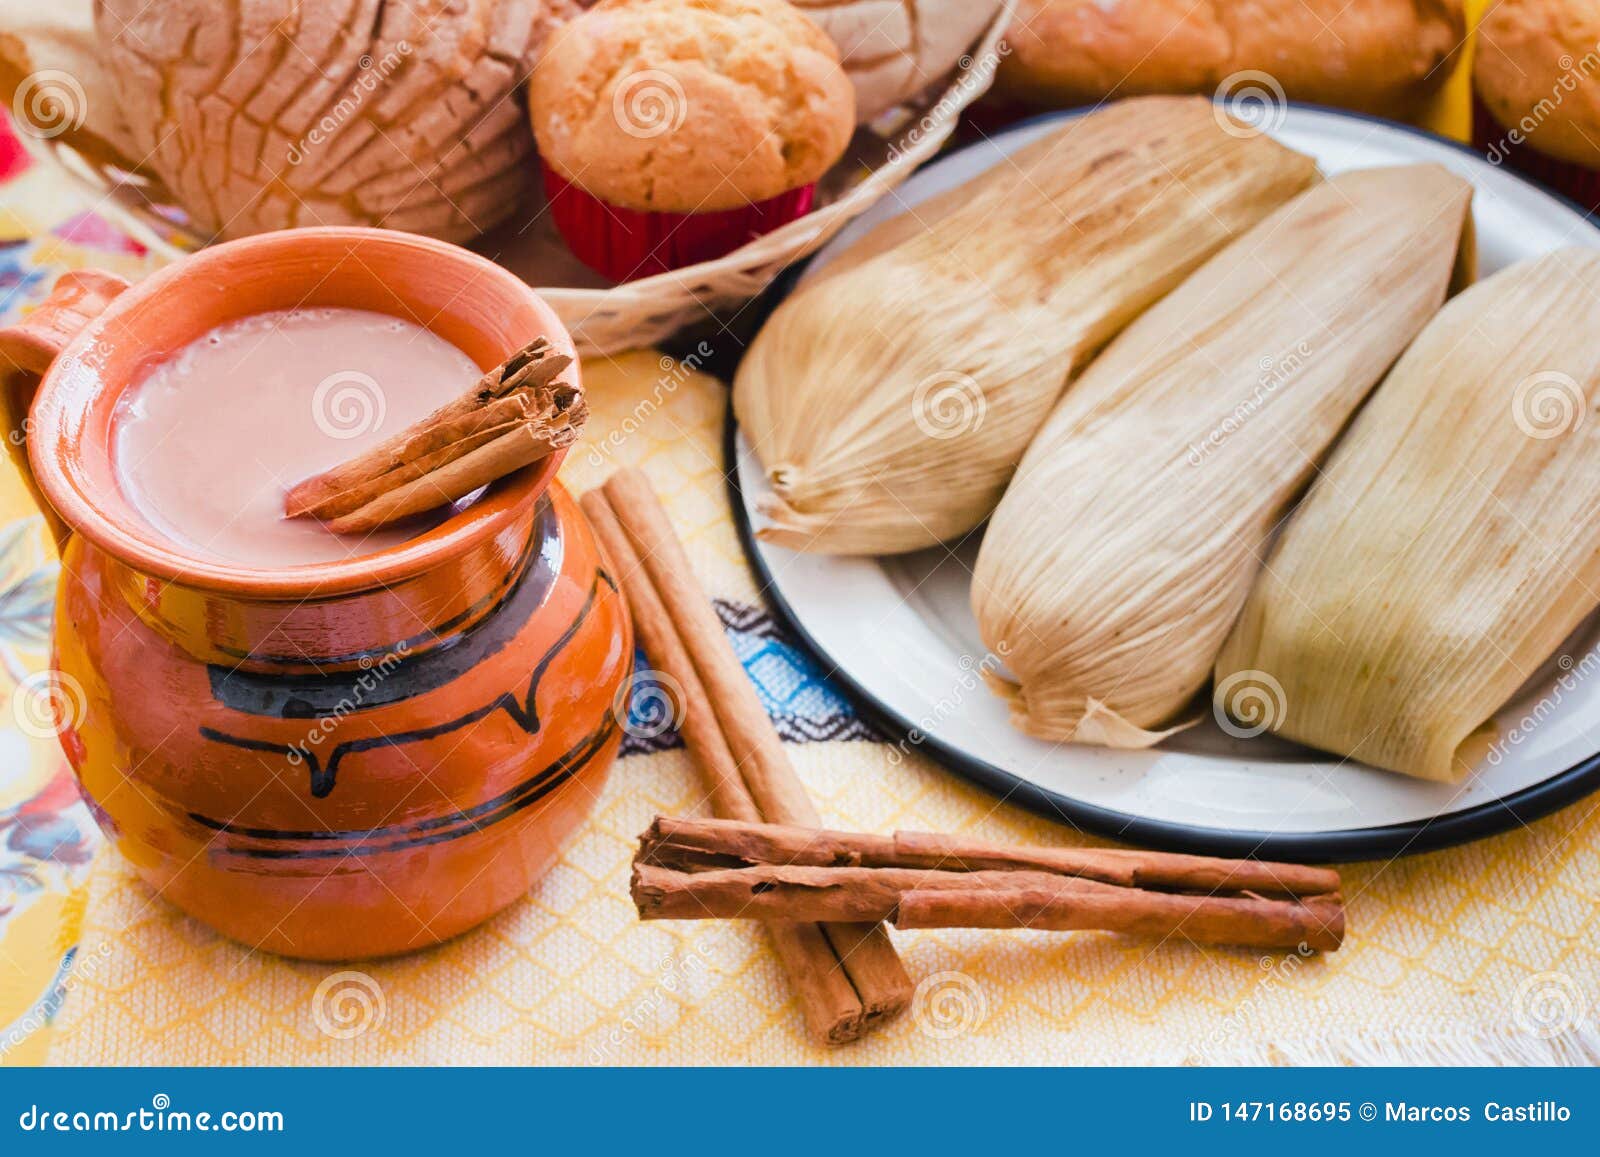 atole de chocolate, mexican traditional beverage and tamales, made with cinnamon and chocolate in mexico